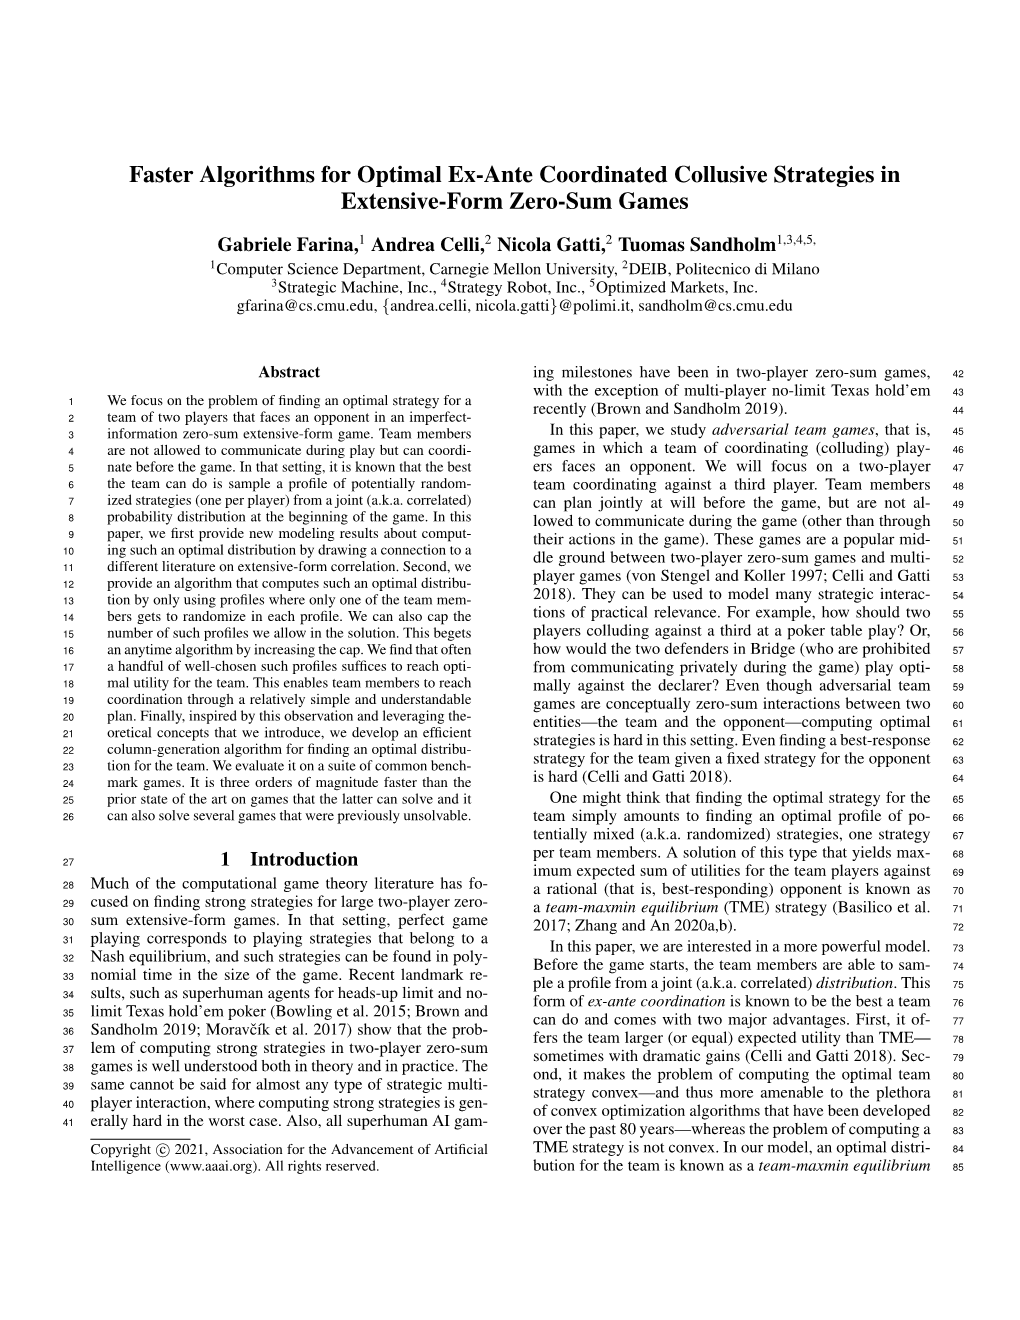 Faster Algorithms for Optimal Ex-Ante Coordinated Collusive Strategies in Extensive-Form Zero-Sum Games